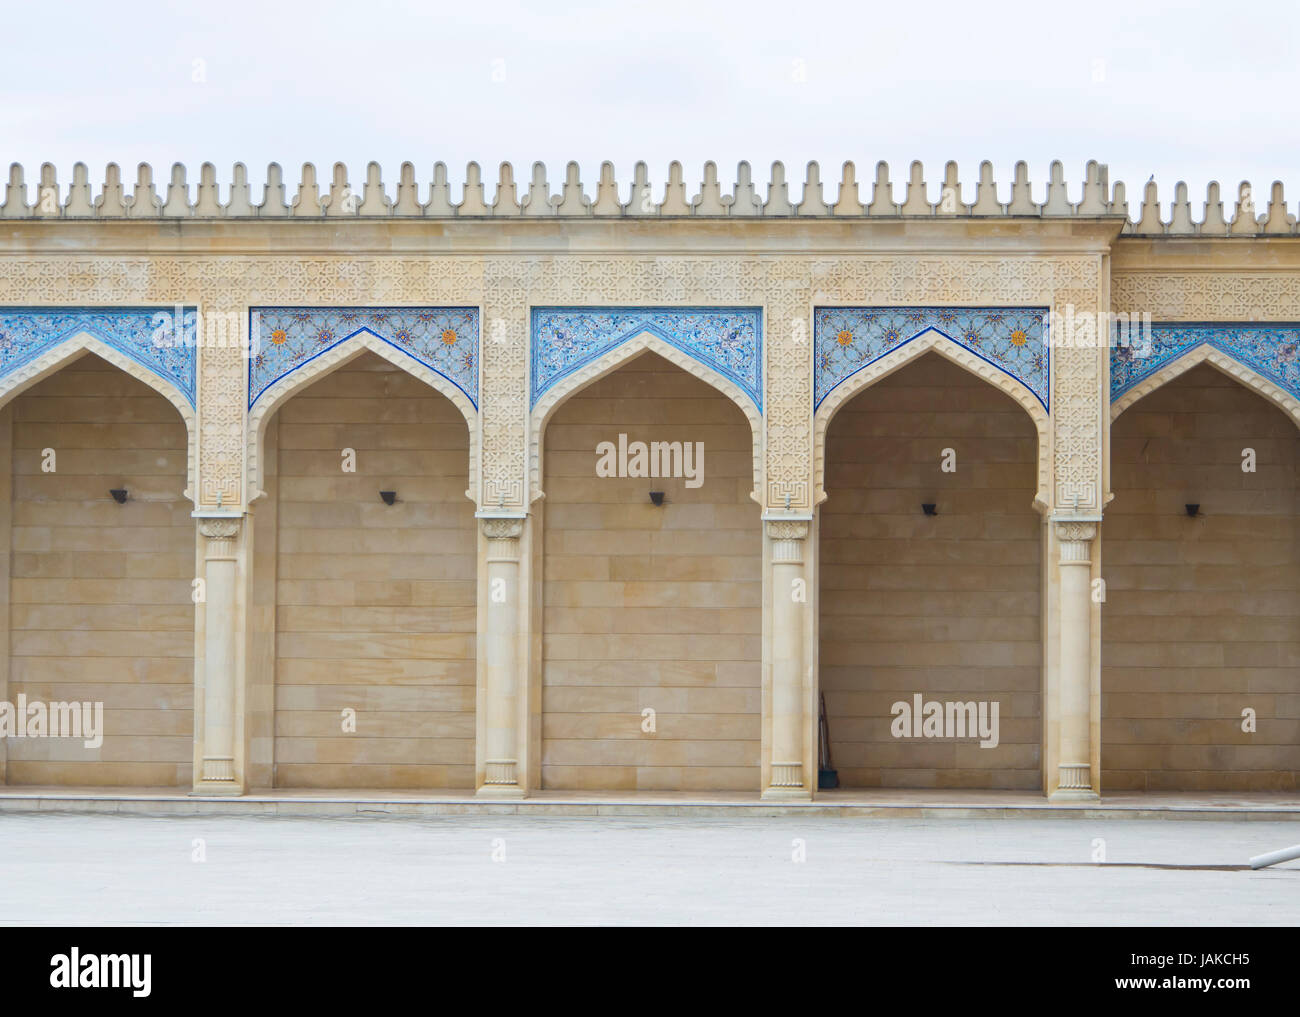 Juma Mosque in the town of  Shamakhi origins dating back to ca 744, reconstructed many times, latest in ca 2010, elaborate courtyard decorations Stock Photo